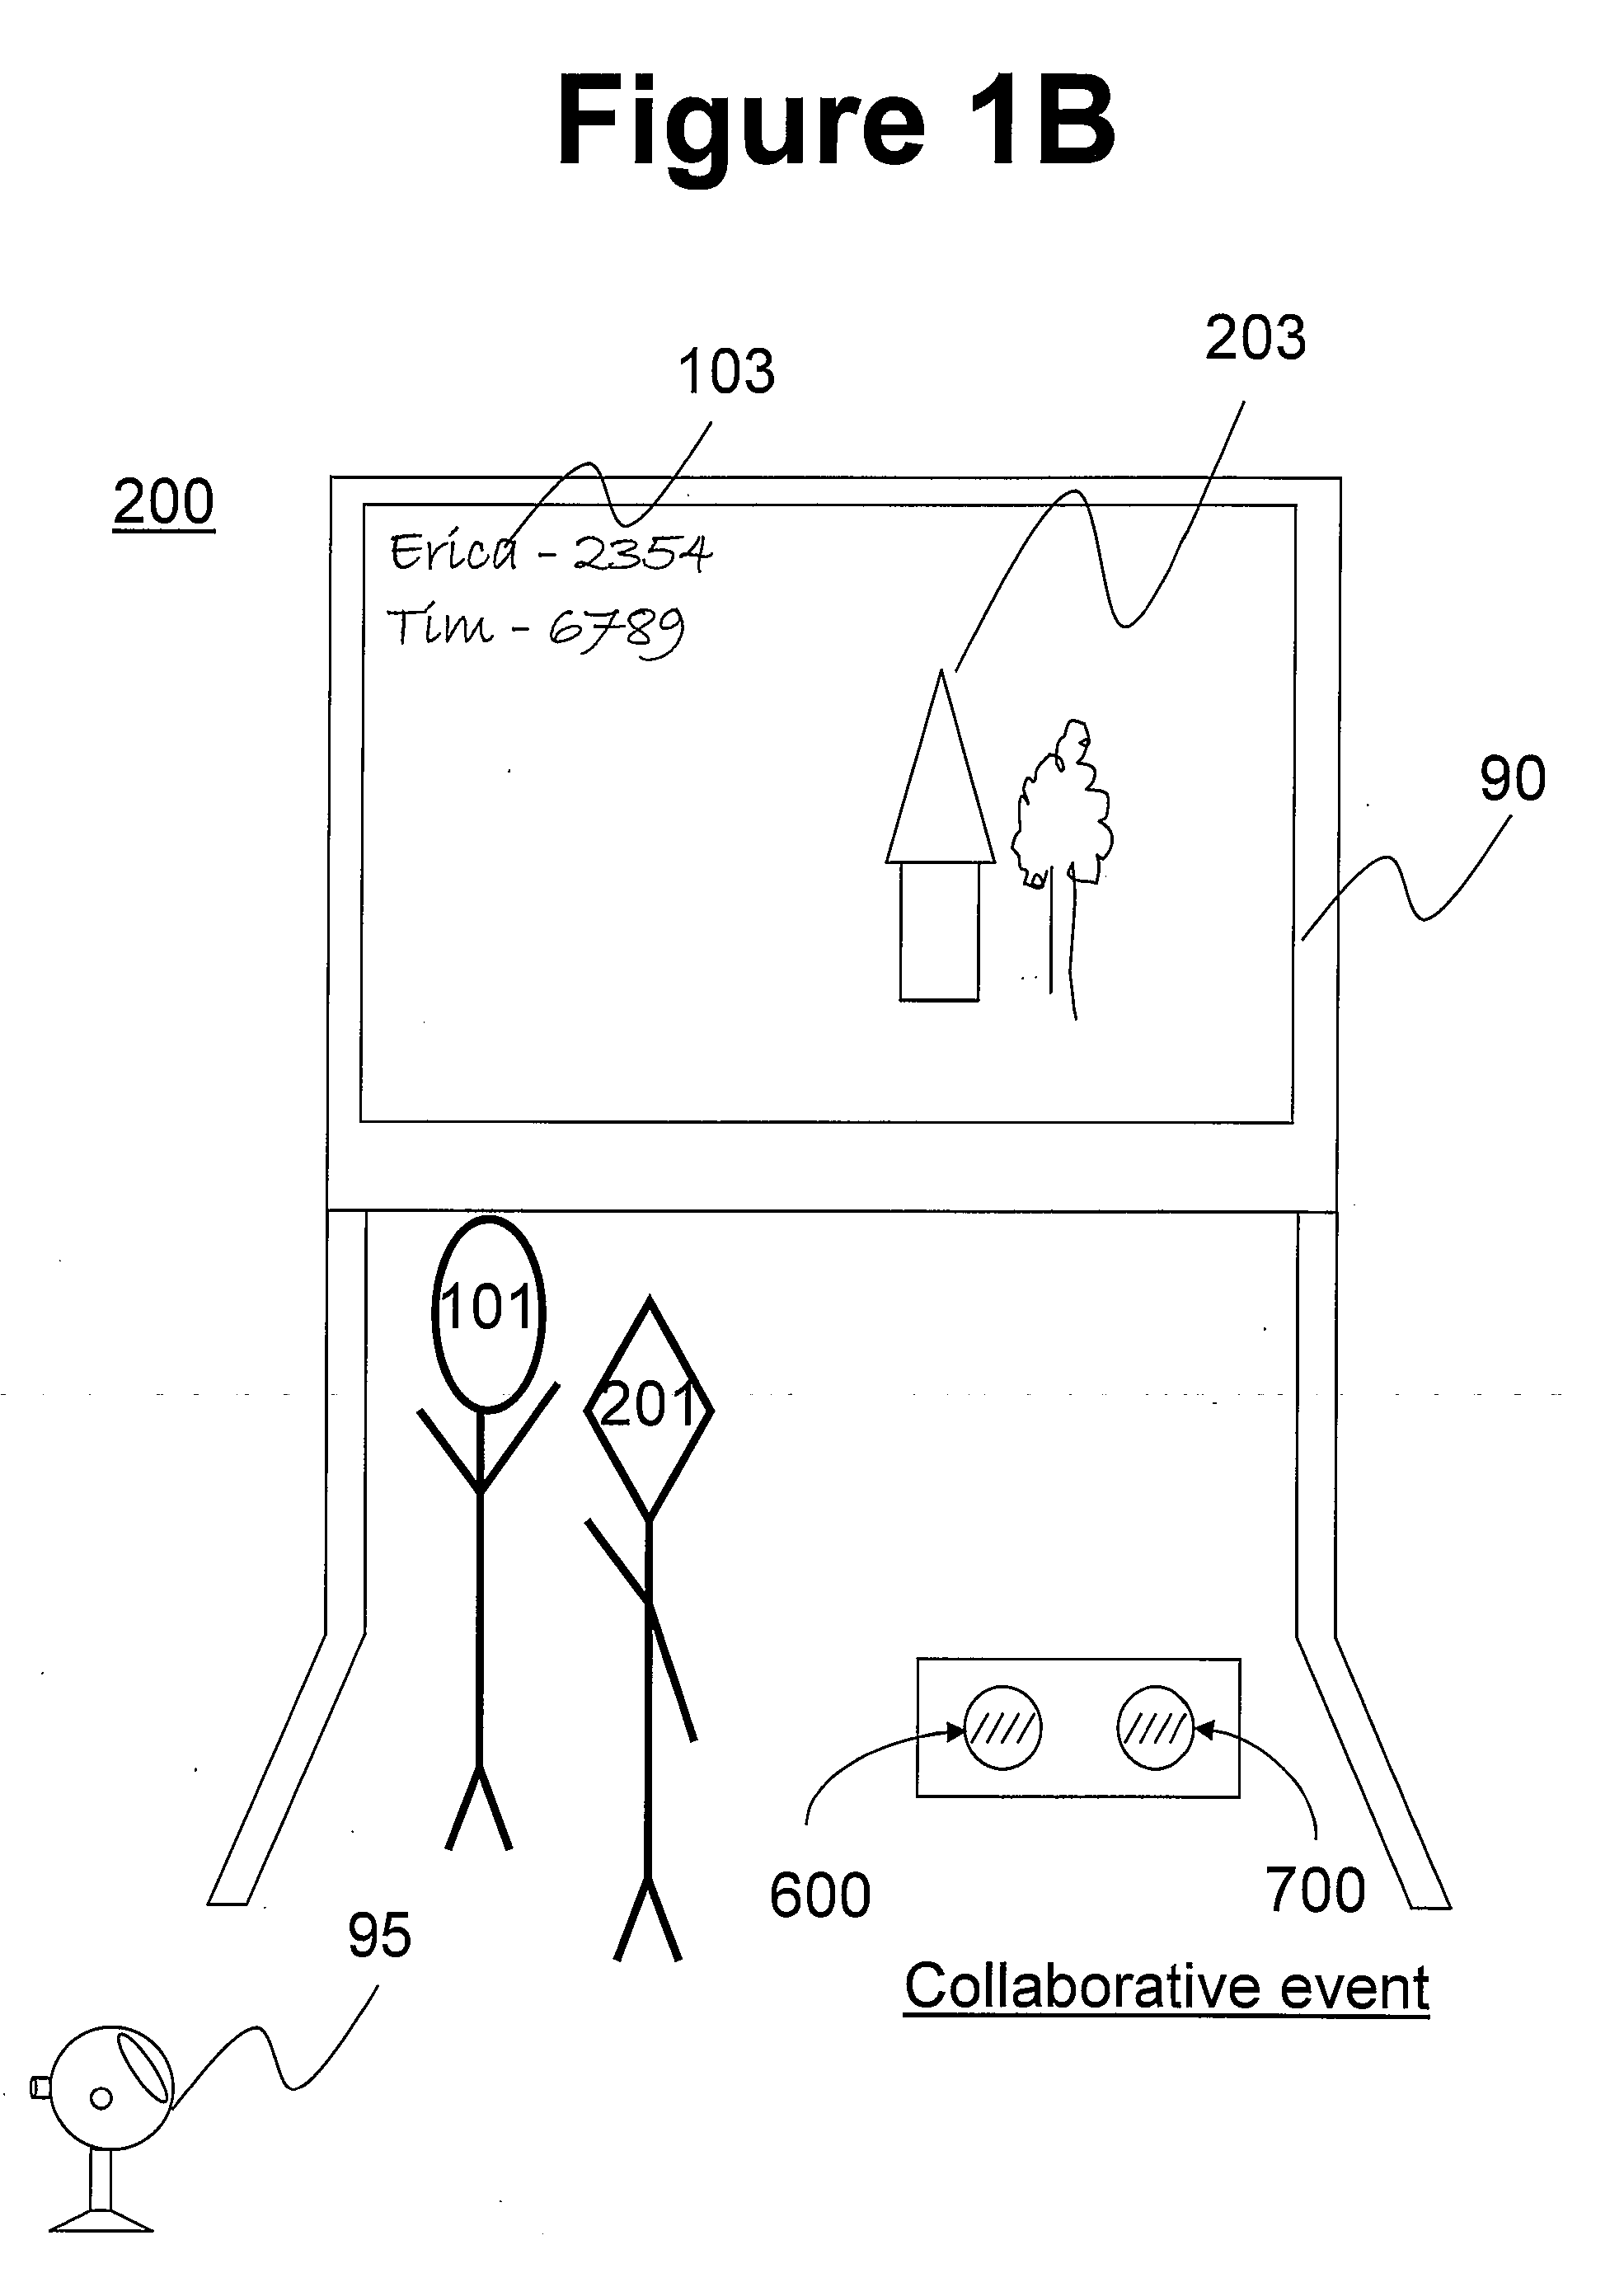 System and method for facilitating the use of whiteboards